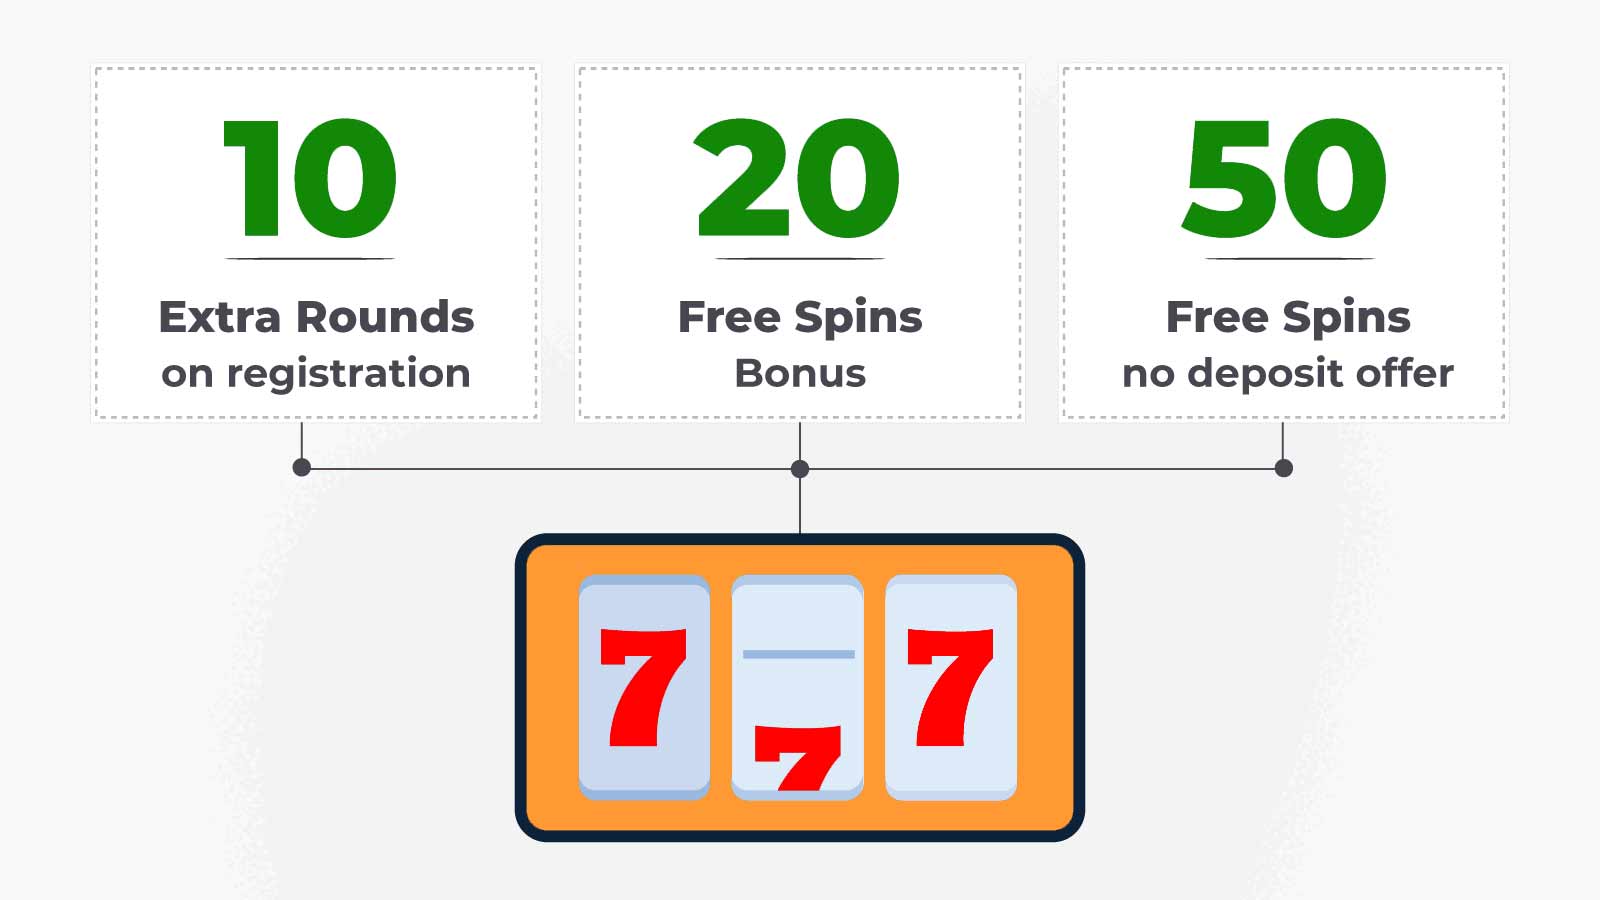 free spins extra rounds and no deposit offer on signup